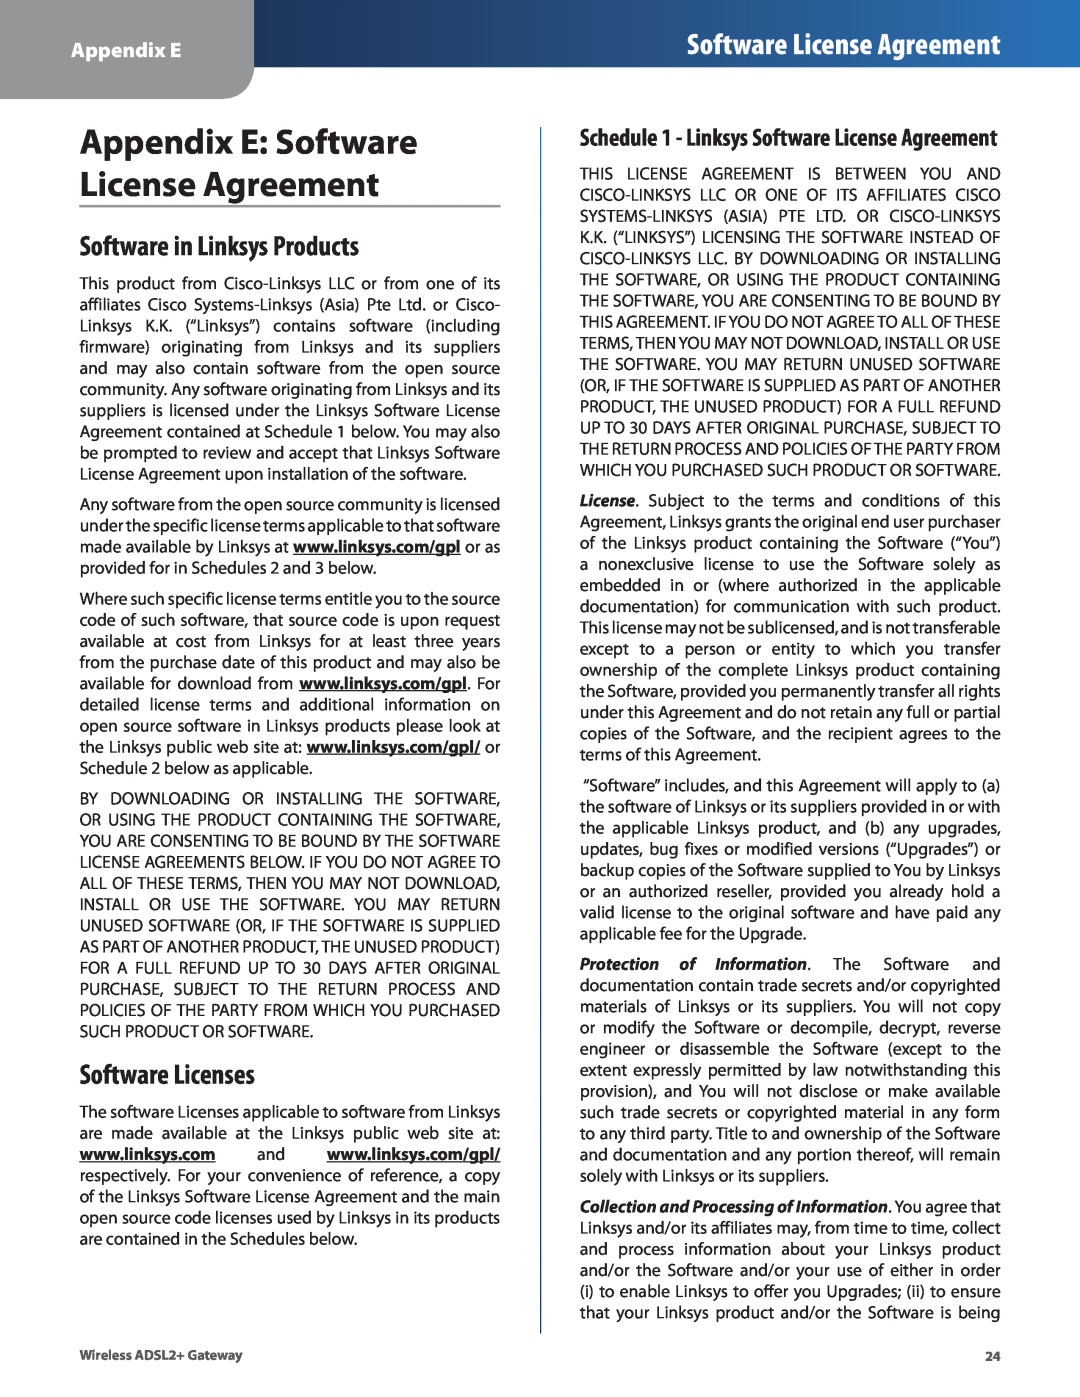 Linksys WAG160N, WAG110, WAG54G2 Appendix E Software License Agreement, Software in Linksys Products, Software Licenses 